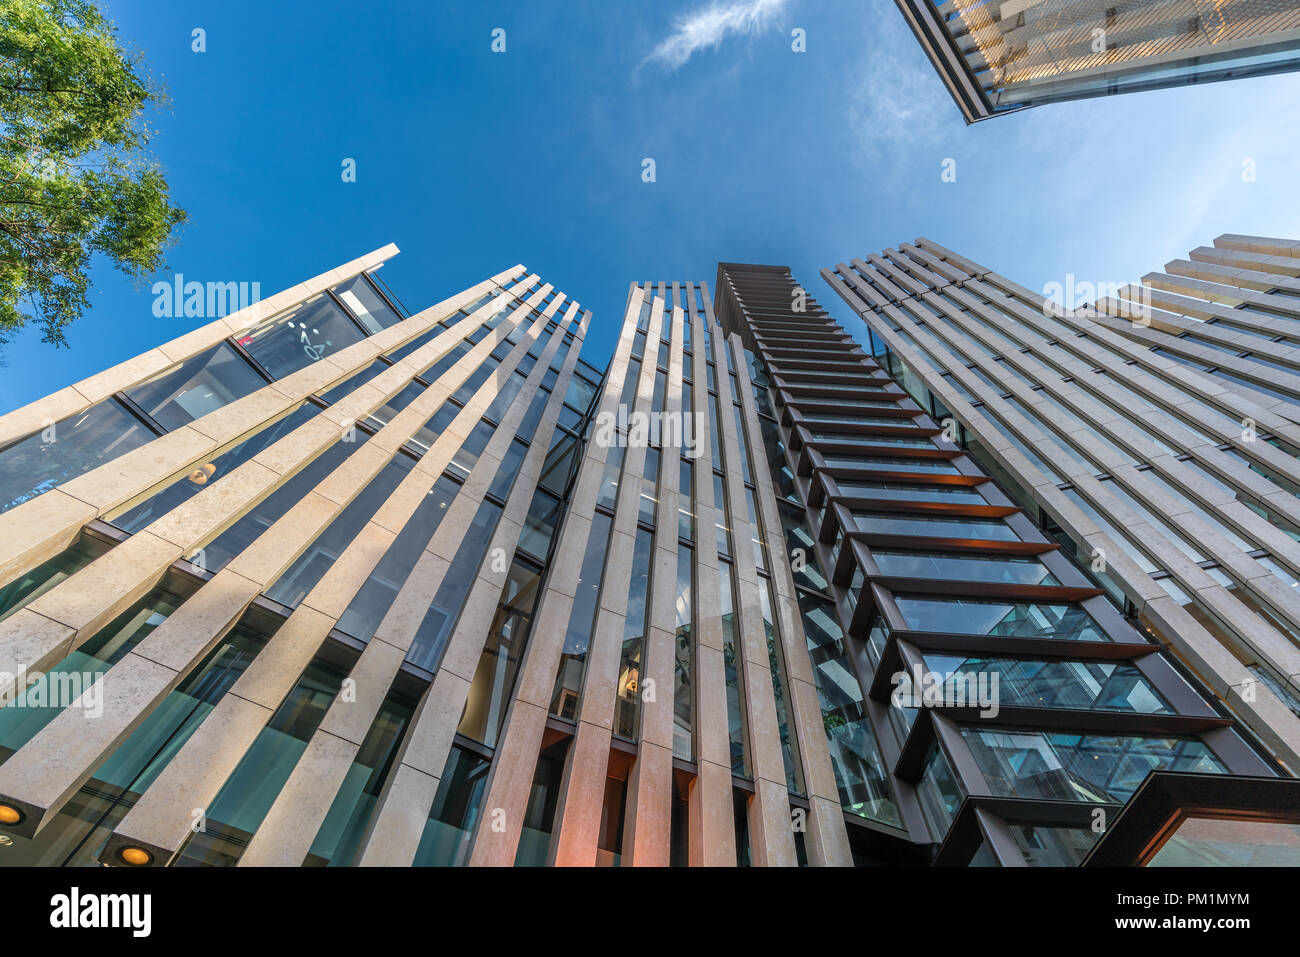 Street Level View Of The Jewels Of Aoyama Building By Architect Jun Mitsui And Associates And La Perla Building Stock Photo Alamy